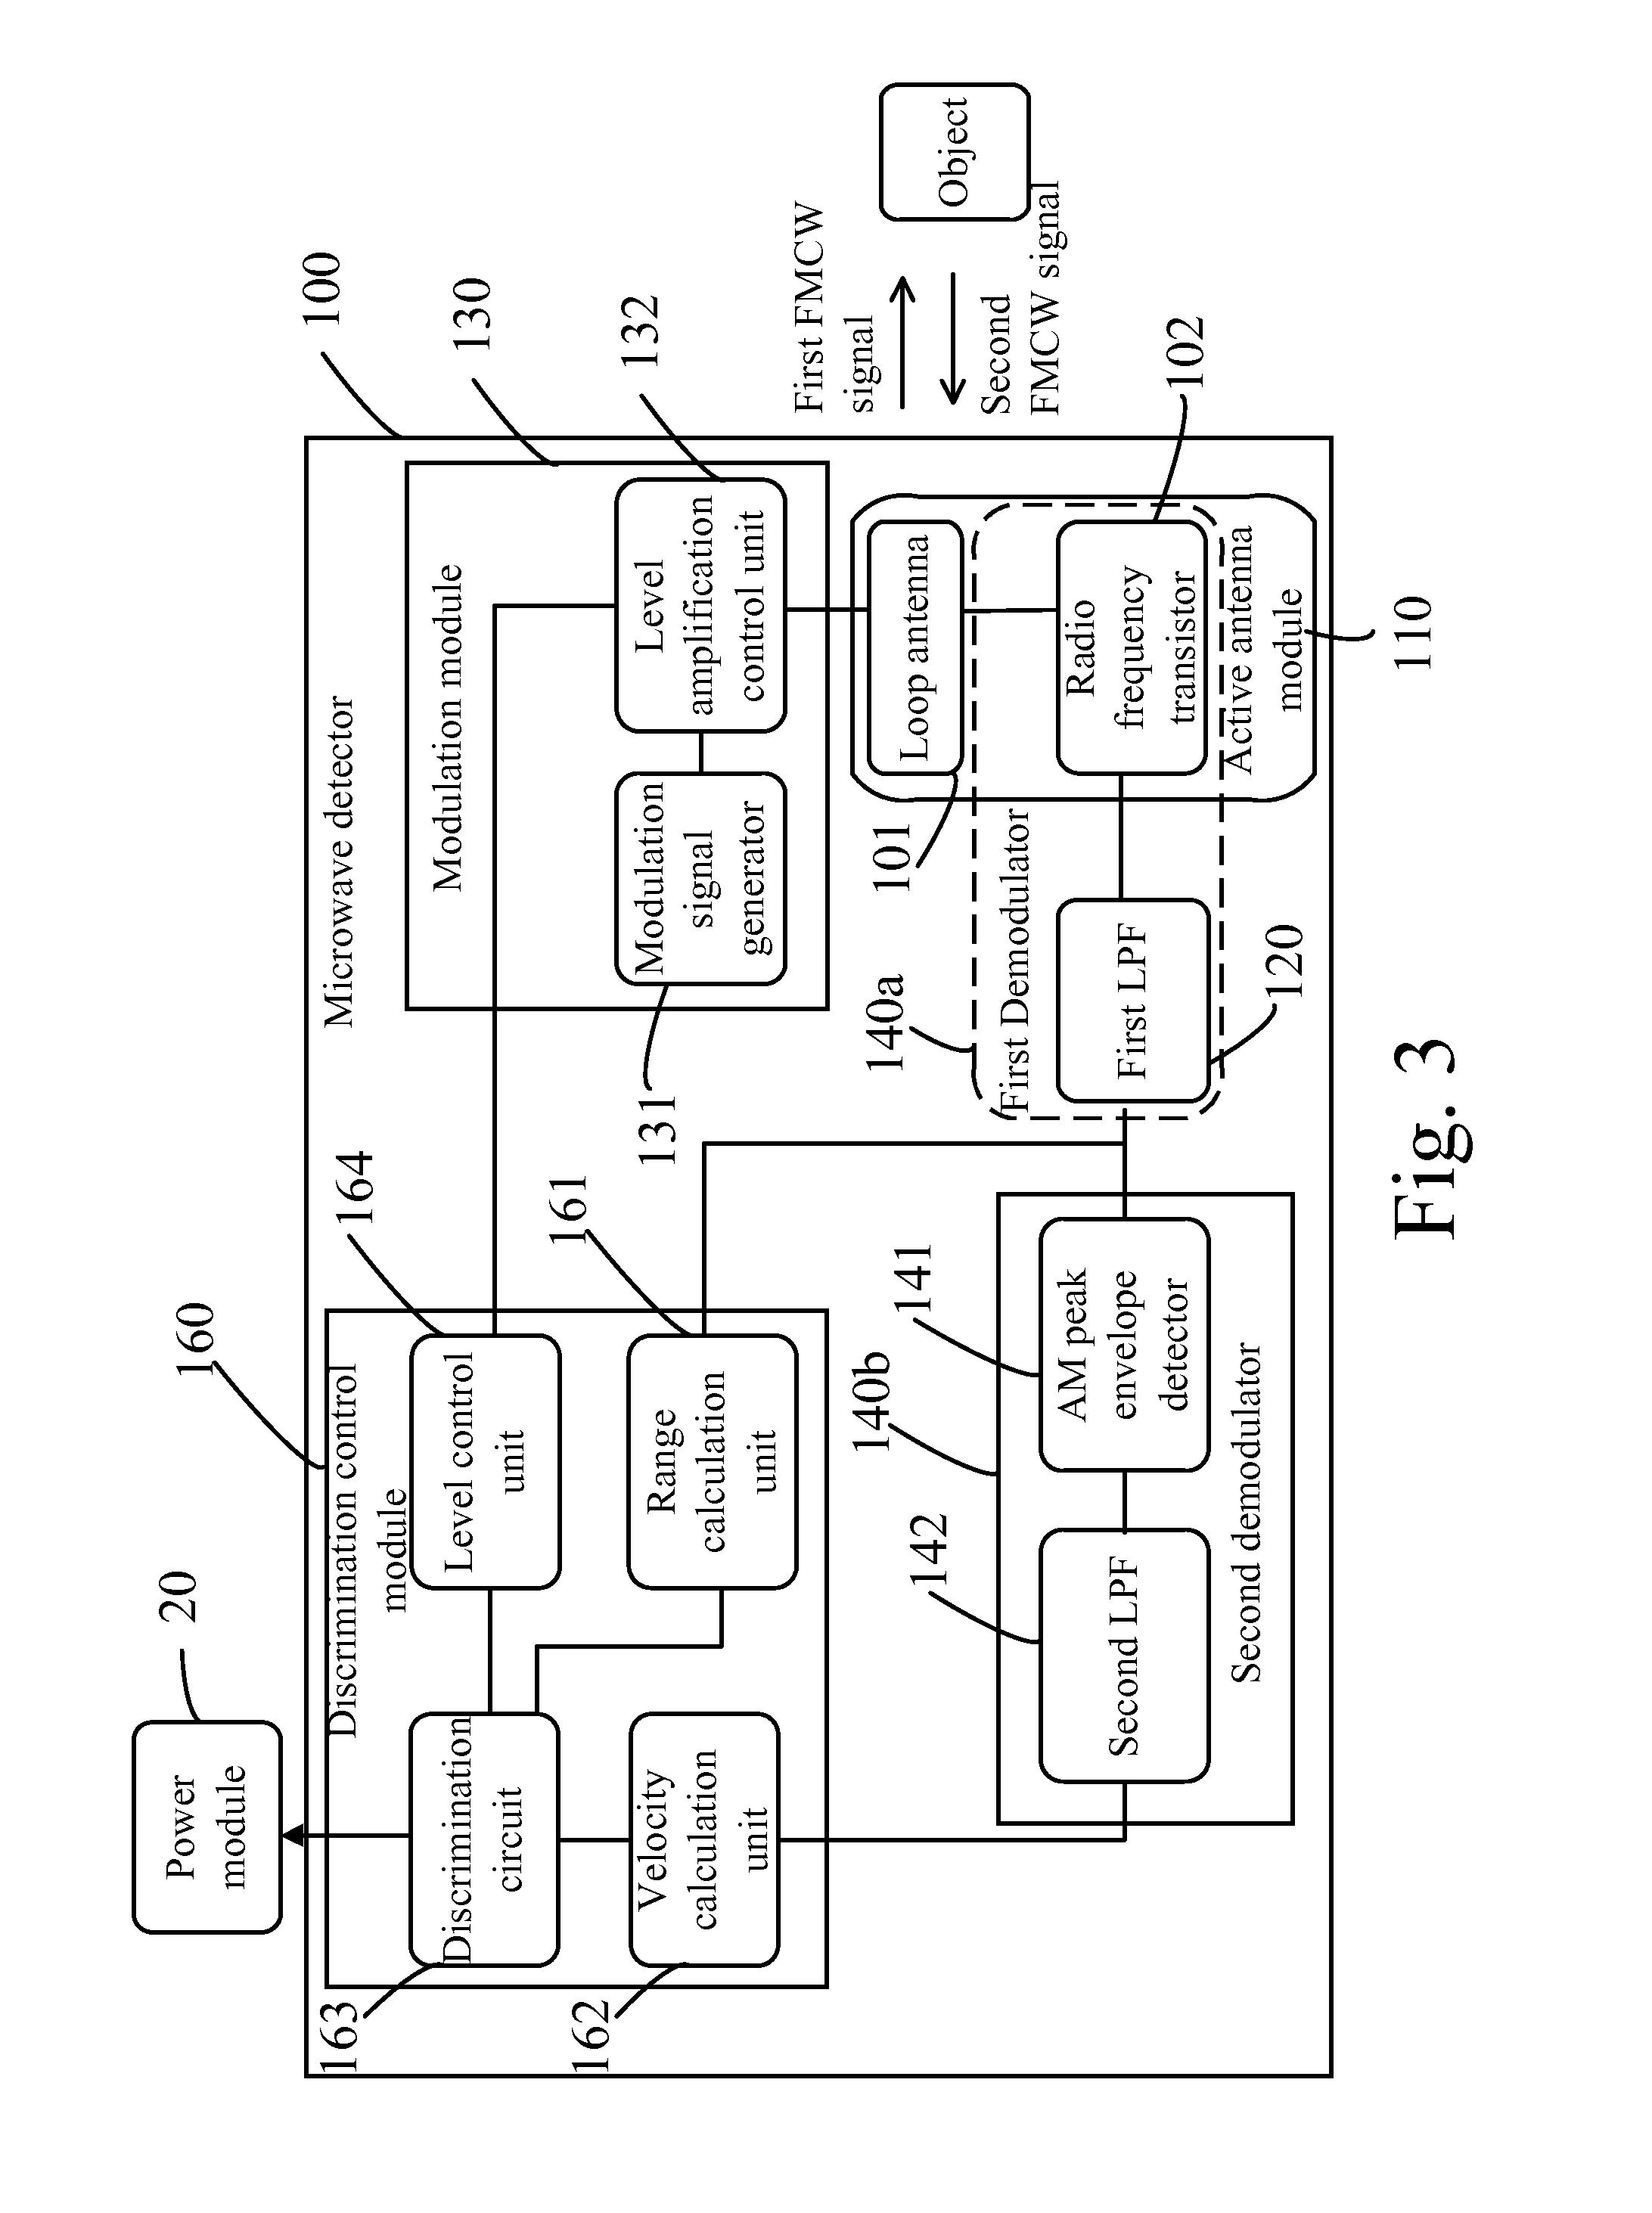 Lighting device with microwave detection function